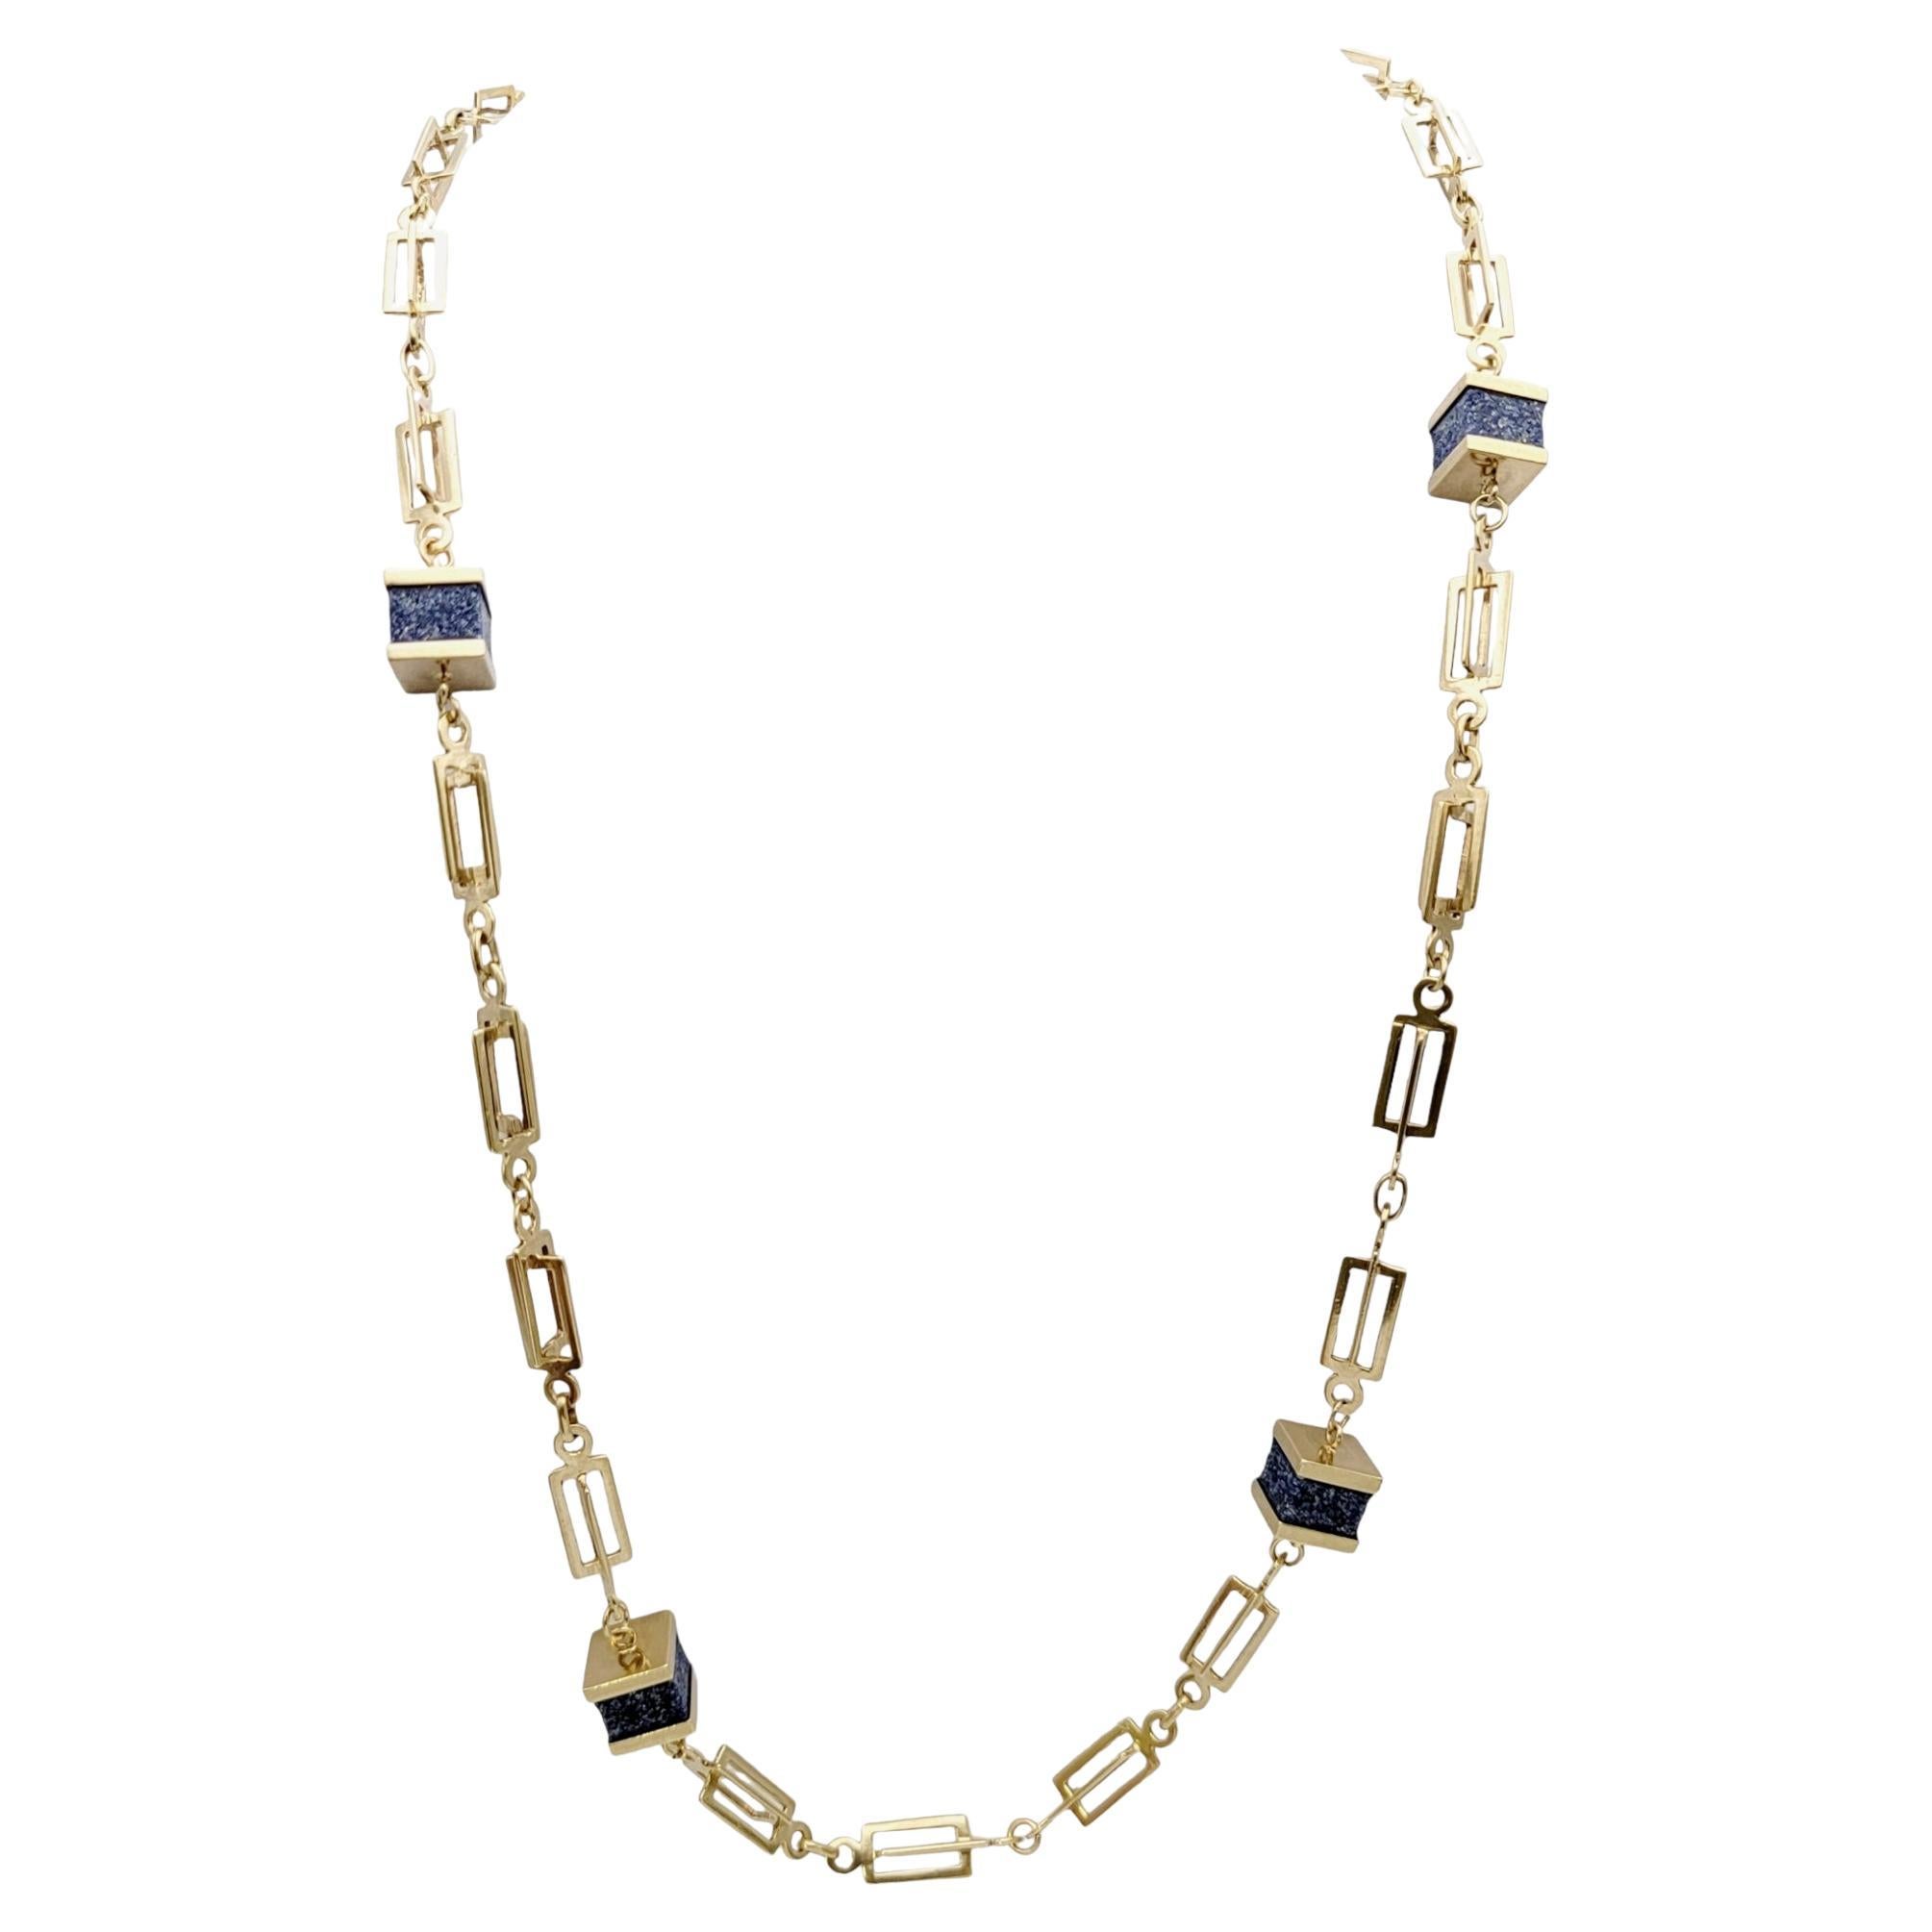 Square Lapis Lazuli Station Necklace with 14 Karat Yellow Gold Chain For Sale